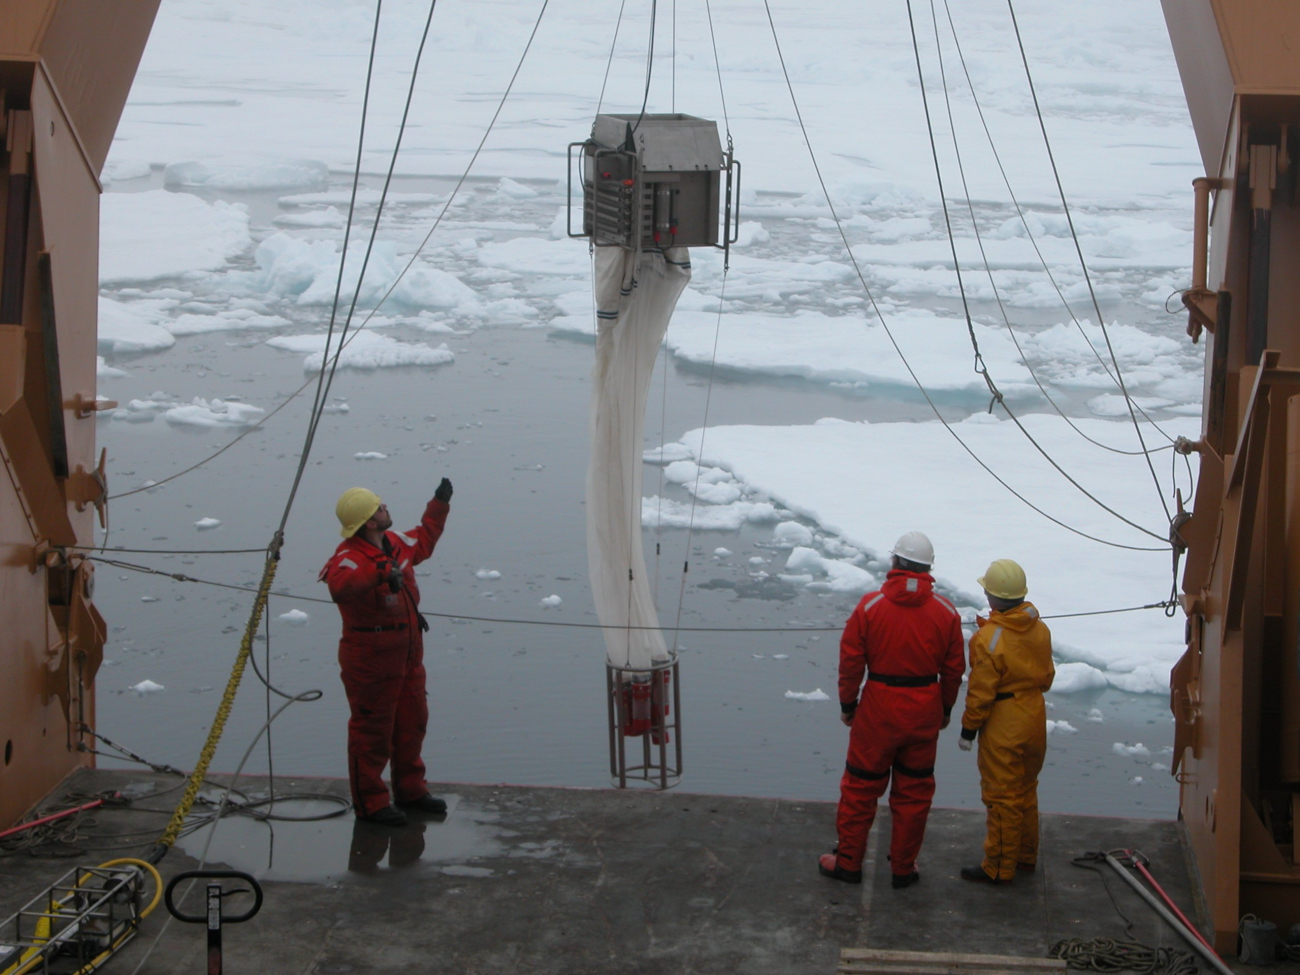 An operational multi-net used to collect zooplankton samples from differentdepths in the water column is deployed! The multinet is lowered on a cable thatalso provides power and communication between scientists on board and theequipment deep in the ocean